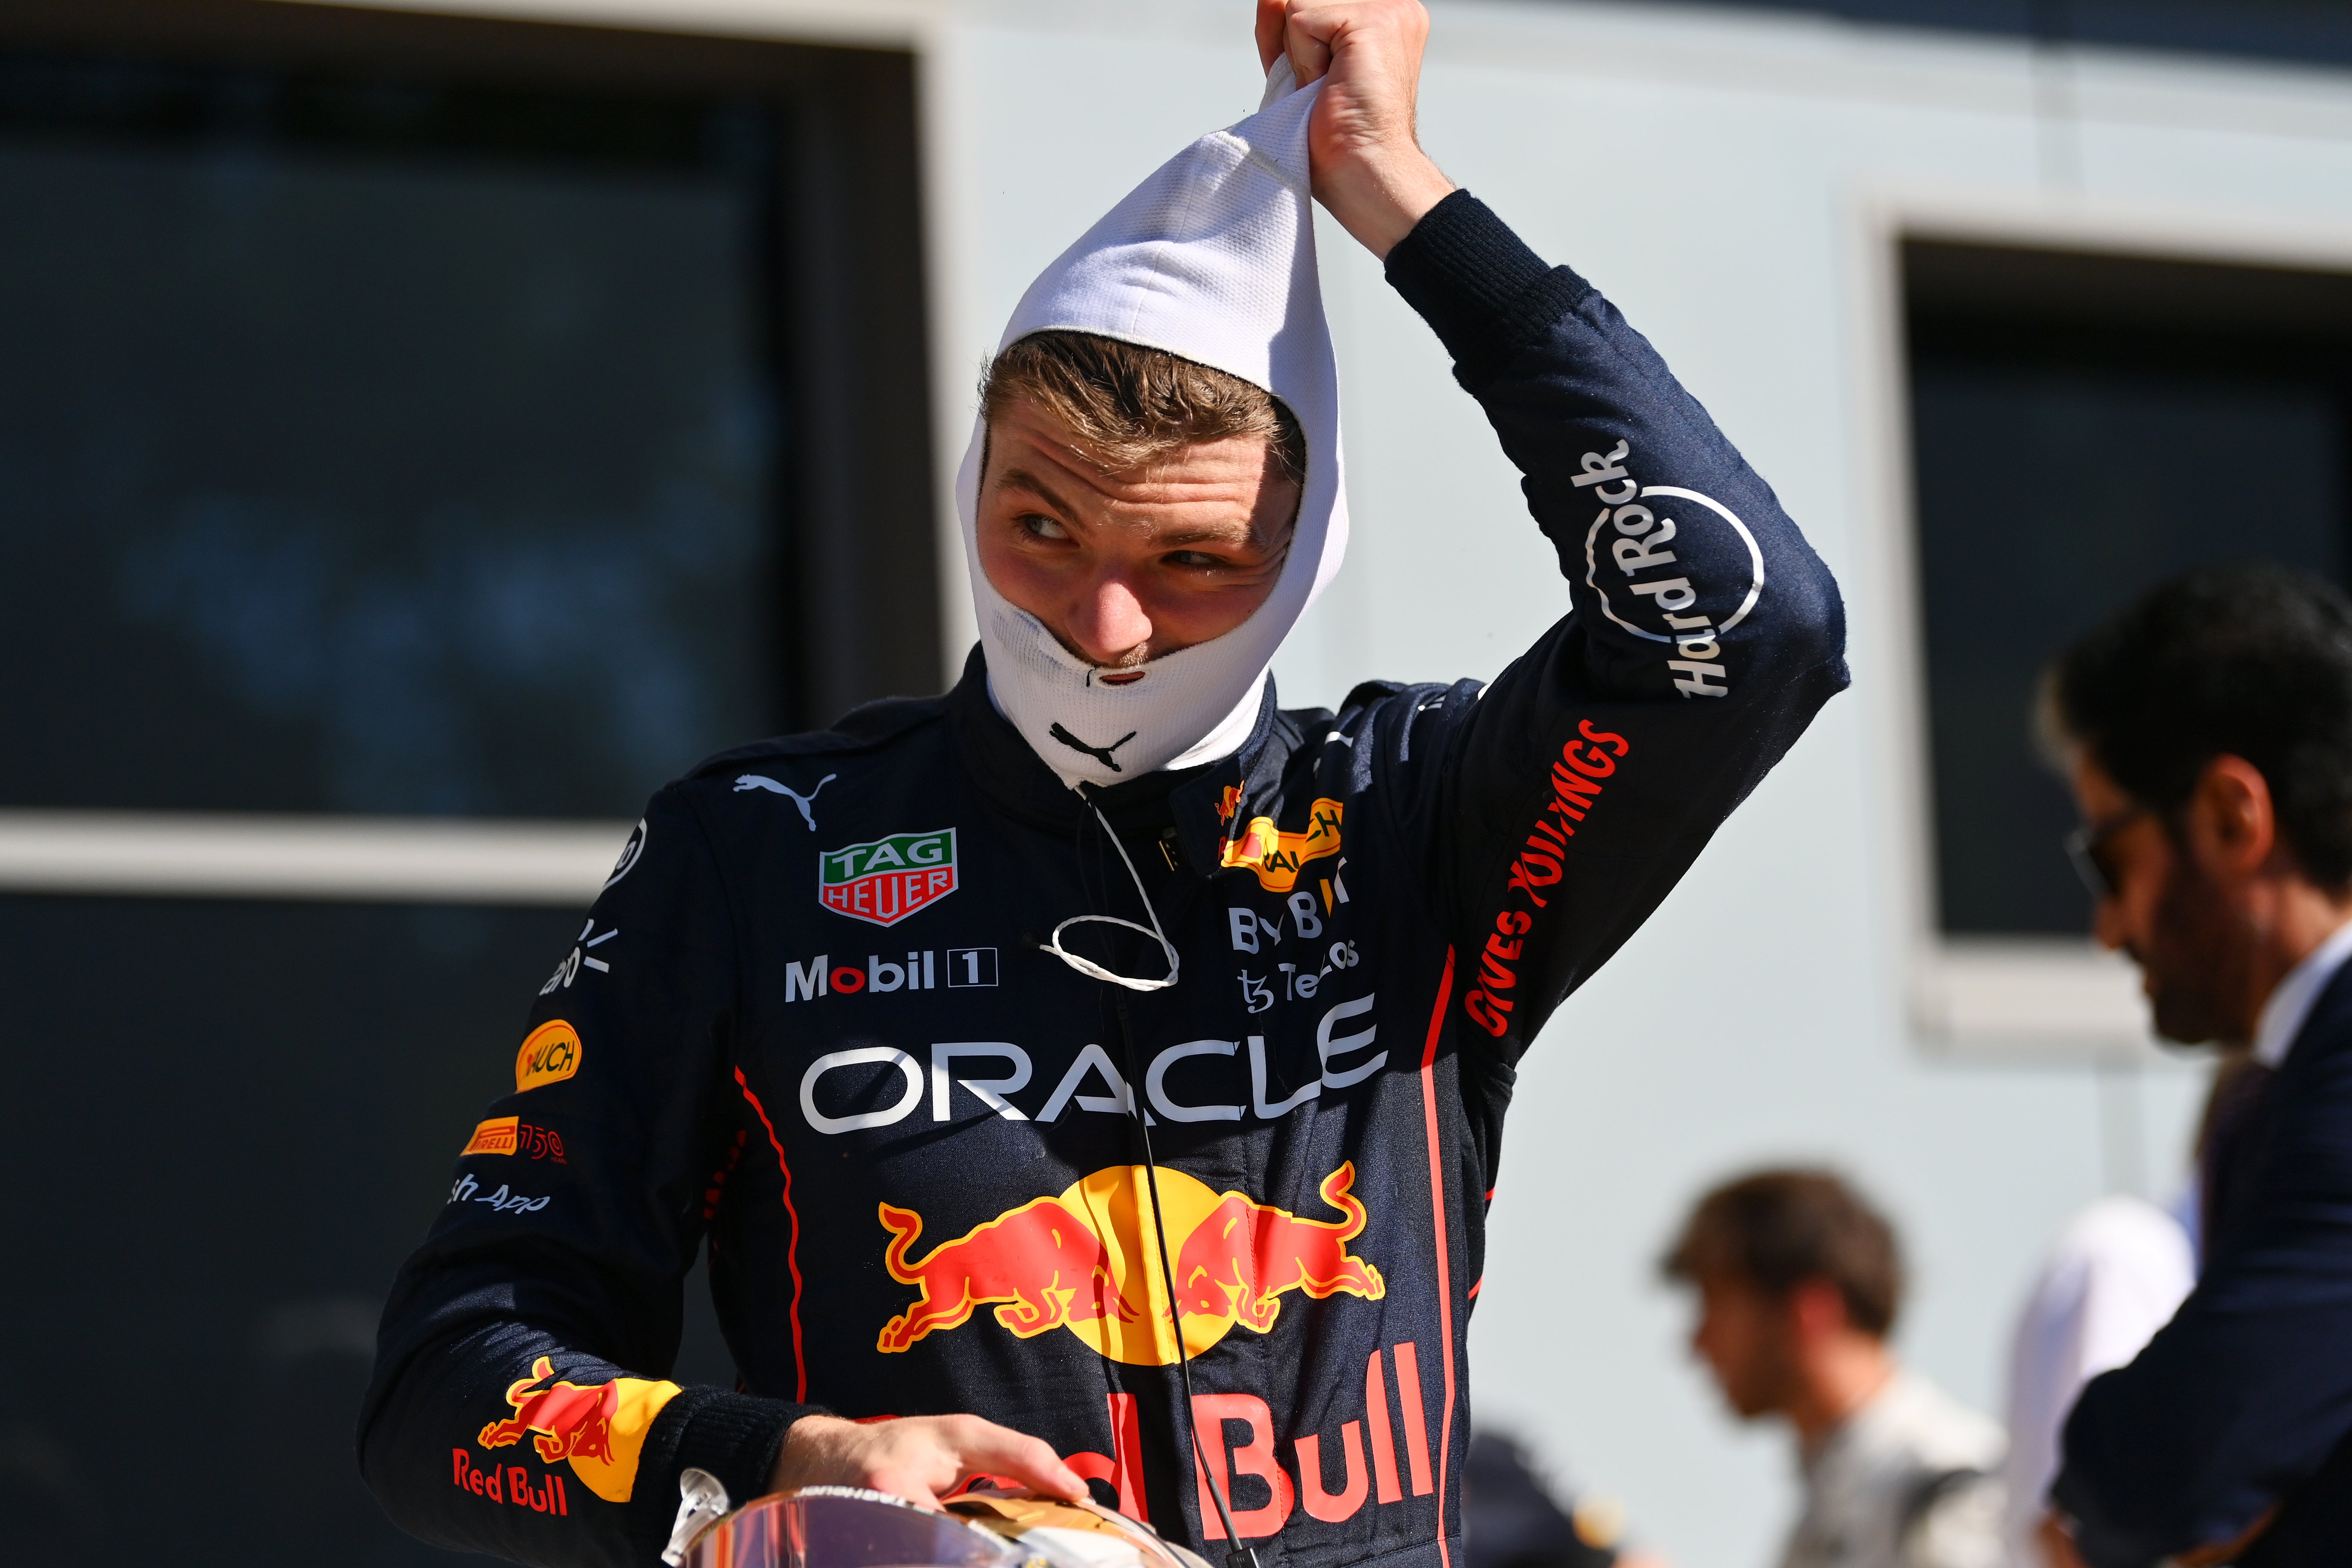 Max Verstappen, Red Bull driver, looks on after victory